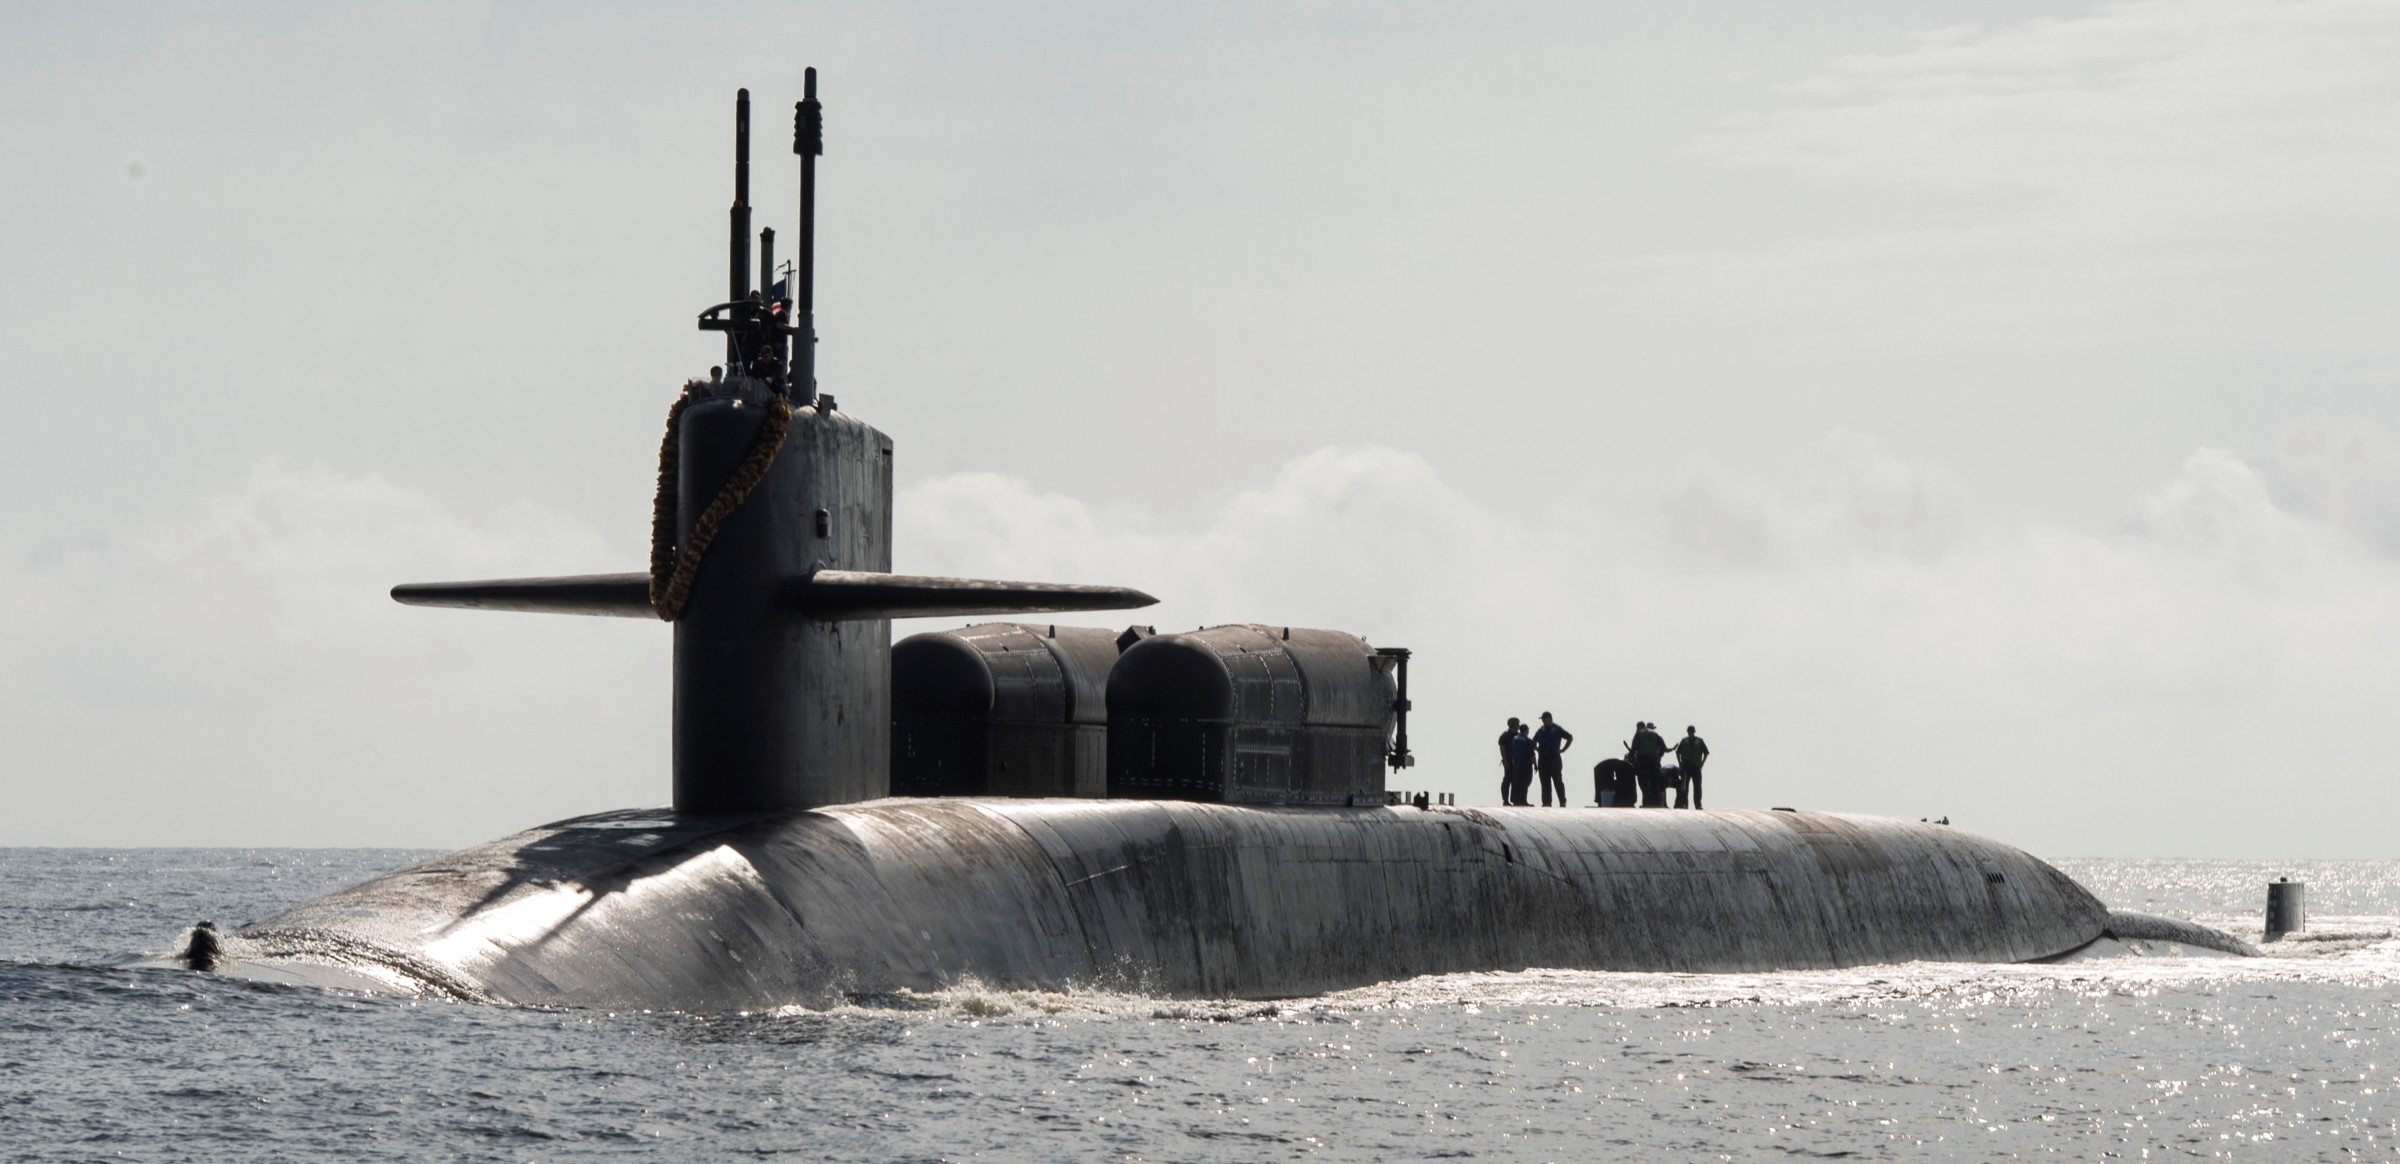 ssgn-728 uss florida guided missile submarine us navy 2013 12